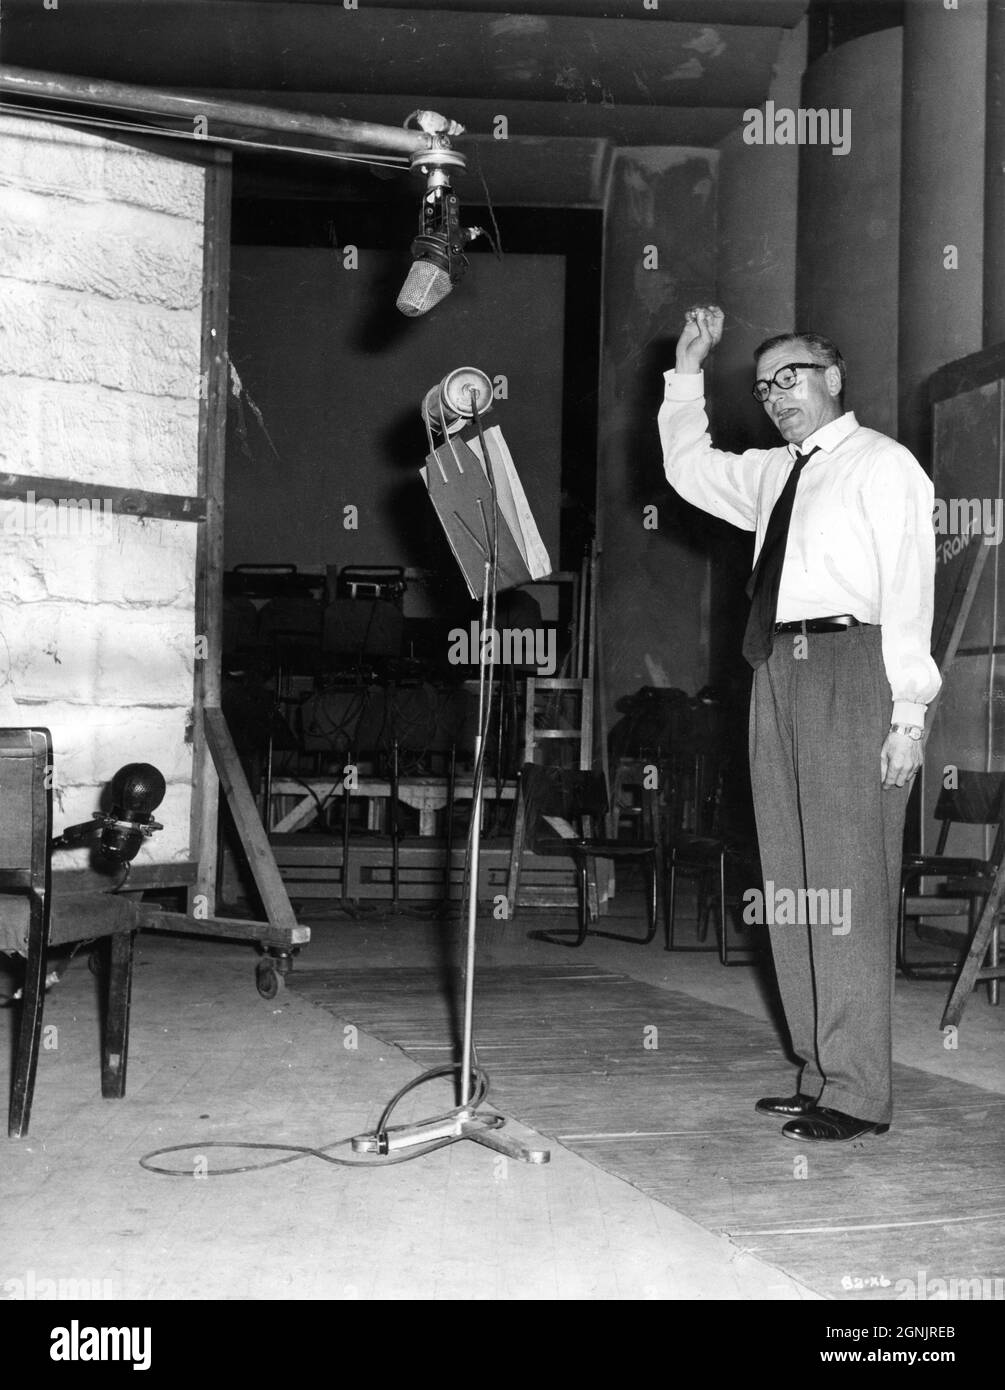 LAURENCE OLIVIER recording the songs he sings as Archie Rice in THE ENTERTAINER 1960 director TONY RICHARDSON screenplay John Osborne and Nigel Kneale adapted from the play by John Osborne music John Addison producer Harry Saltzman Woodfall Film Productions / British Lion Films (UK) - Continental Distributing (US) Stock Photo